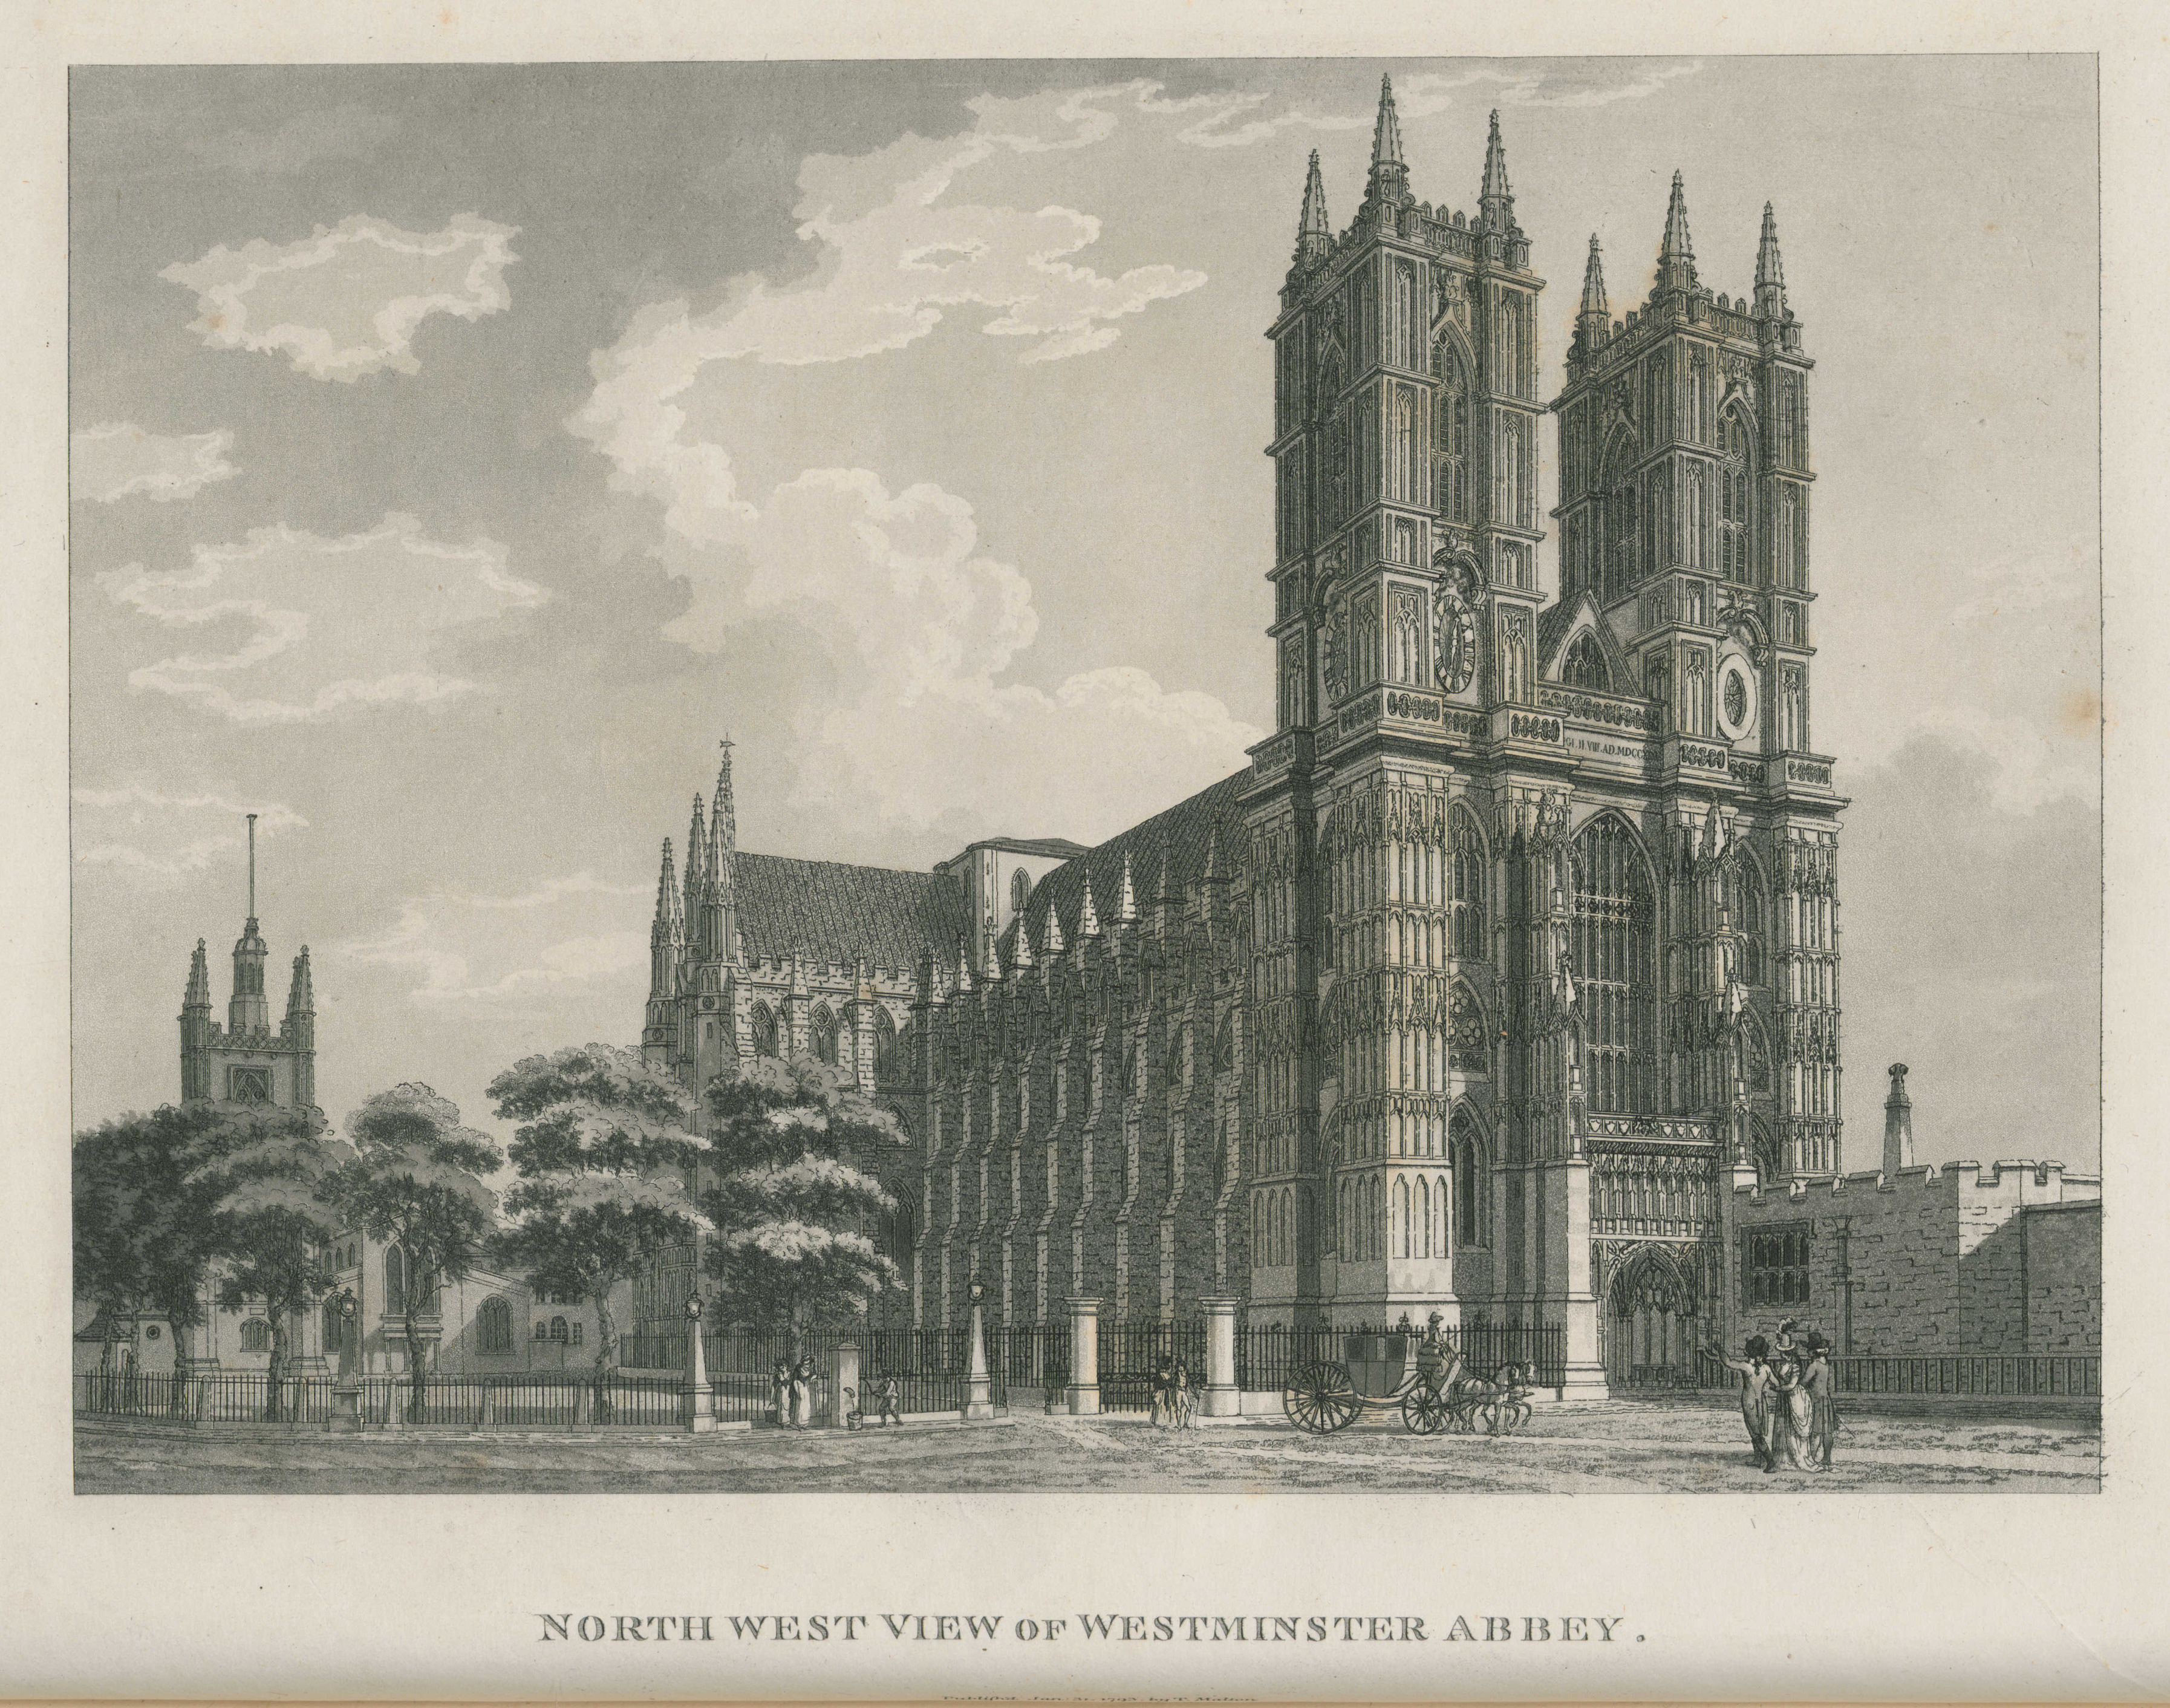 007 - Malton - North West View of Westminster Abbey